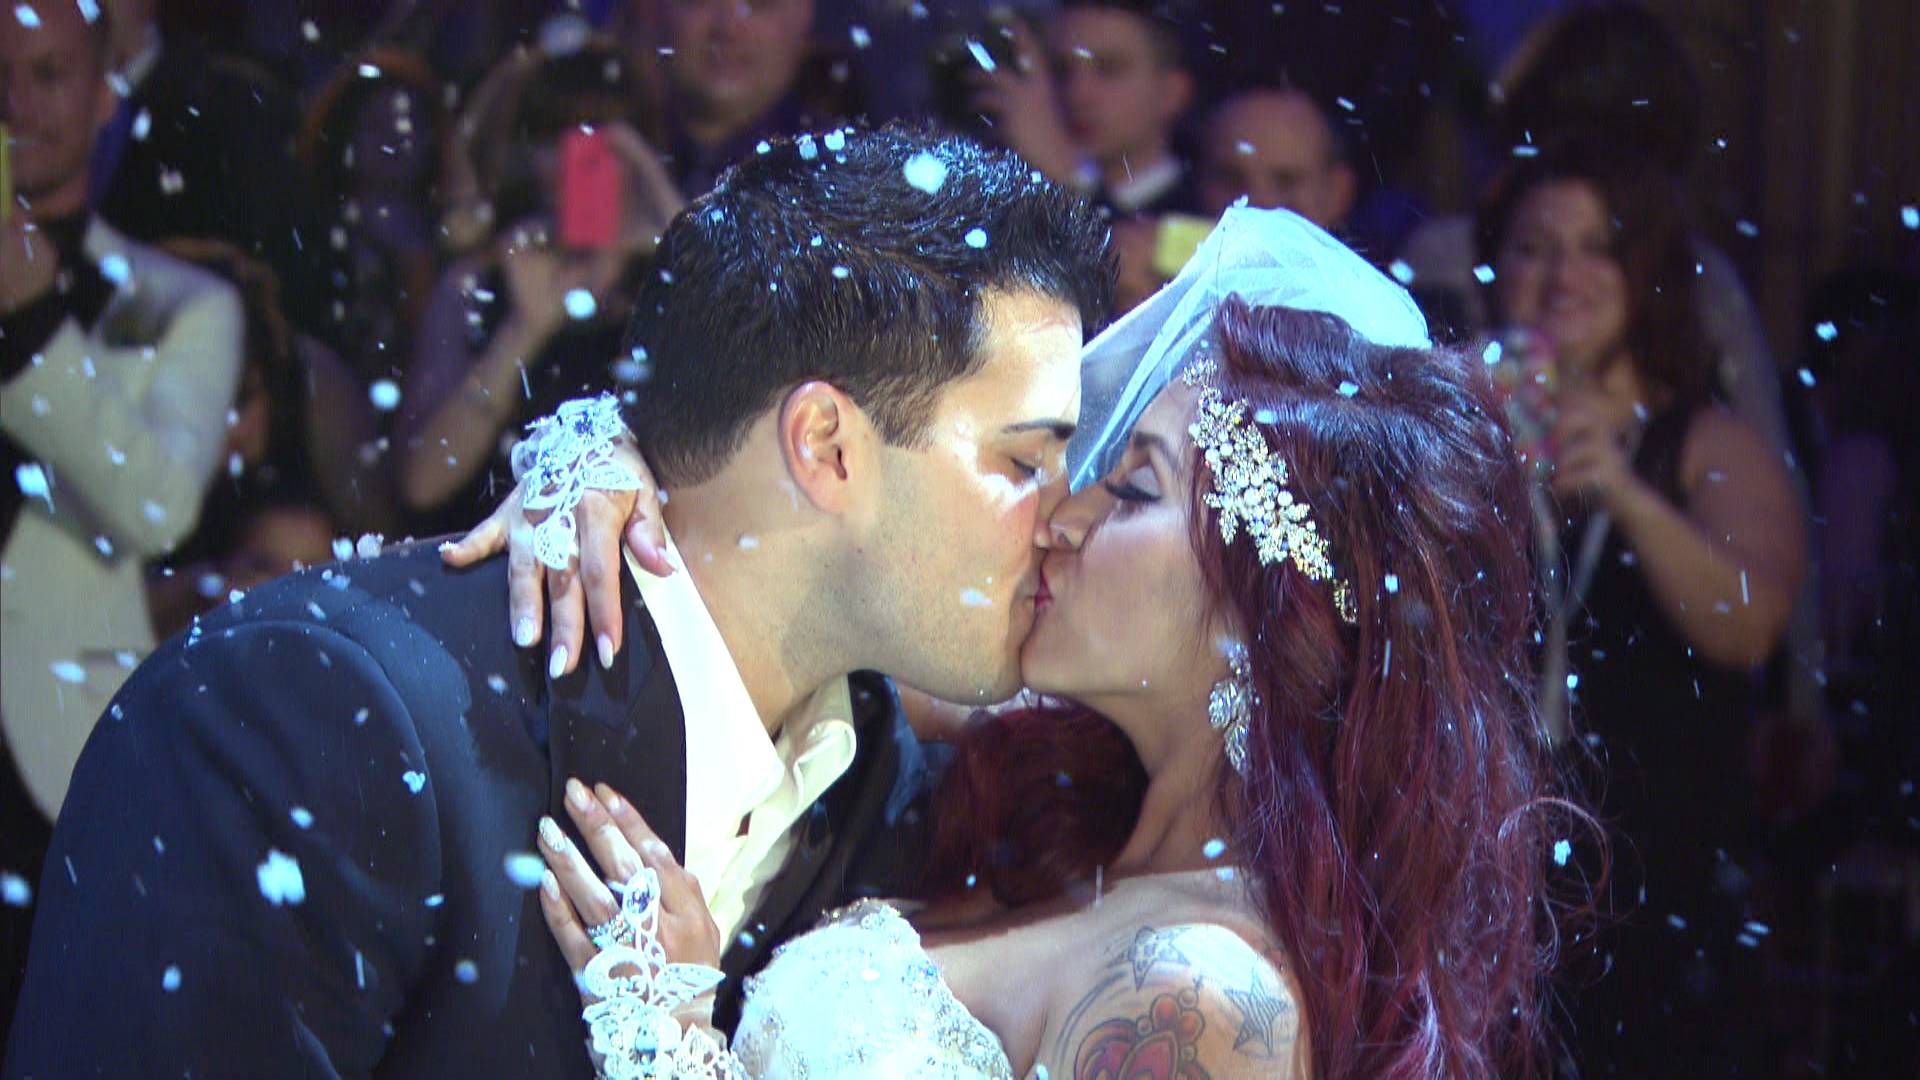 Snooki and JWoww's Dos and Don'ts of Getting Engaged